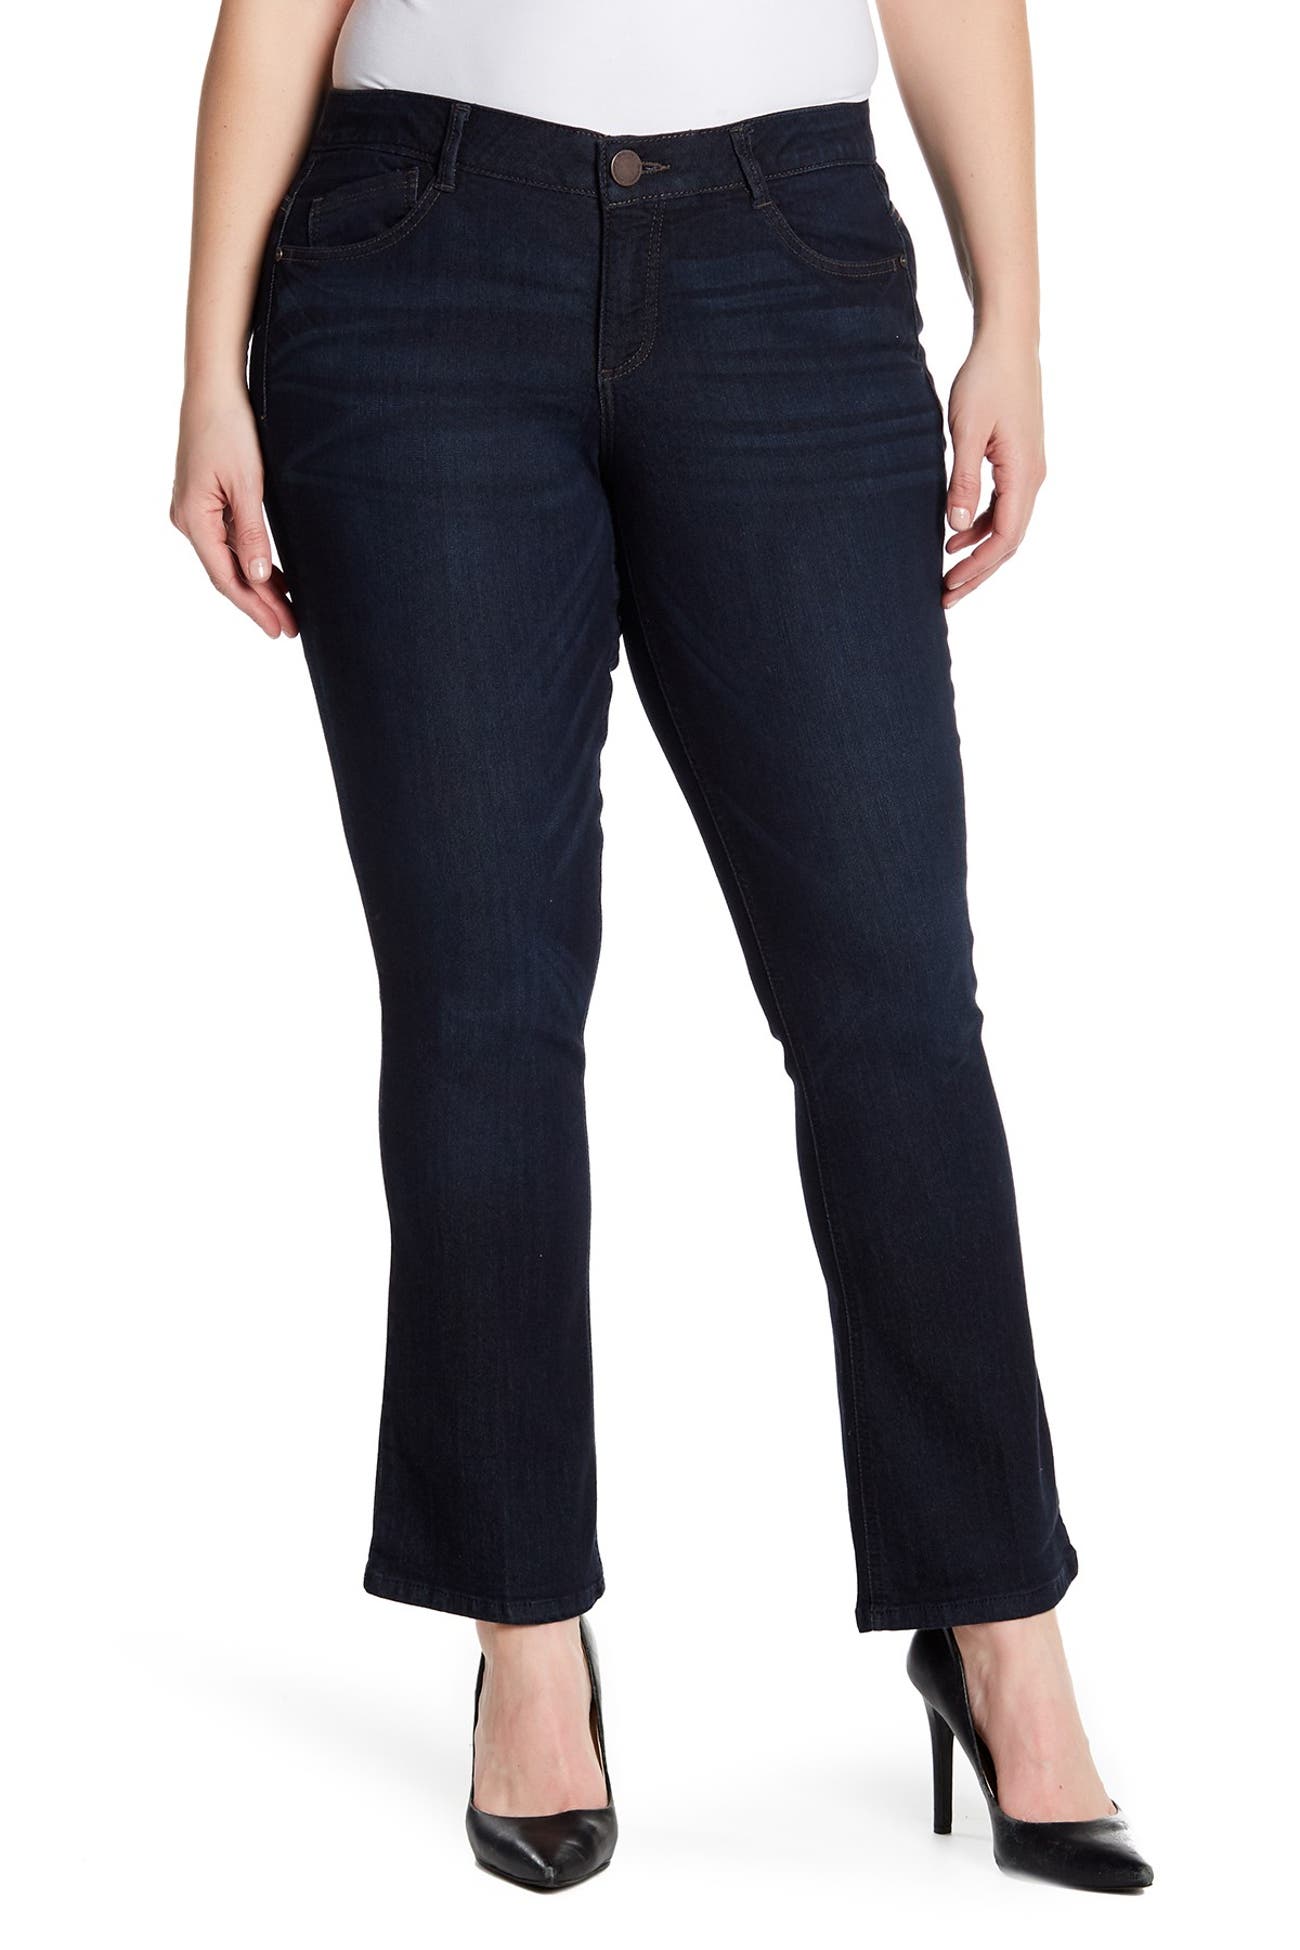 Democracy | Itty Bitty Mid Rise Bootcut Jeans | Nordstrom Rack